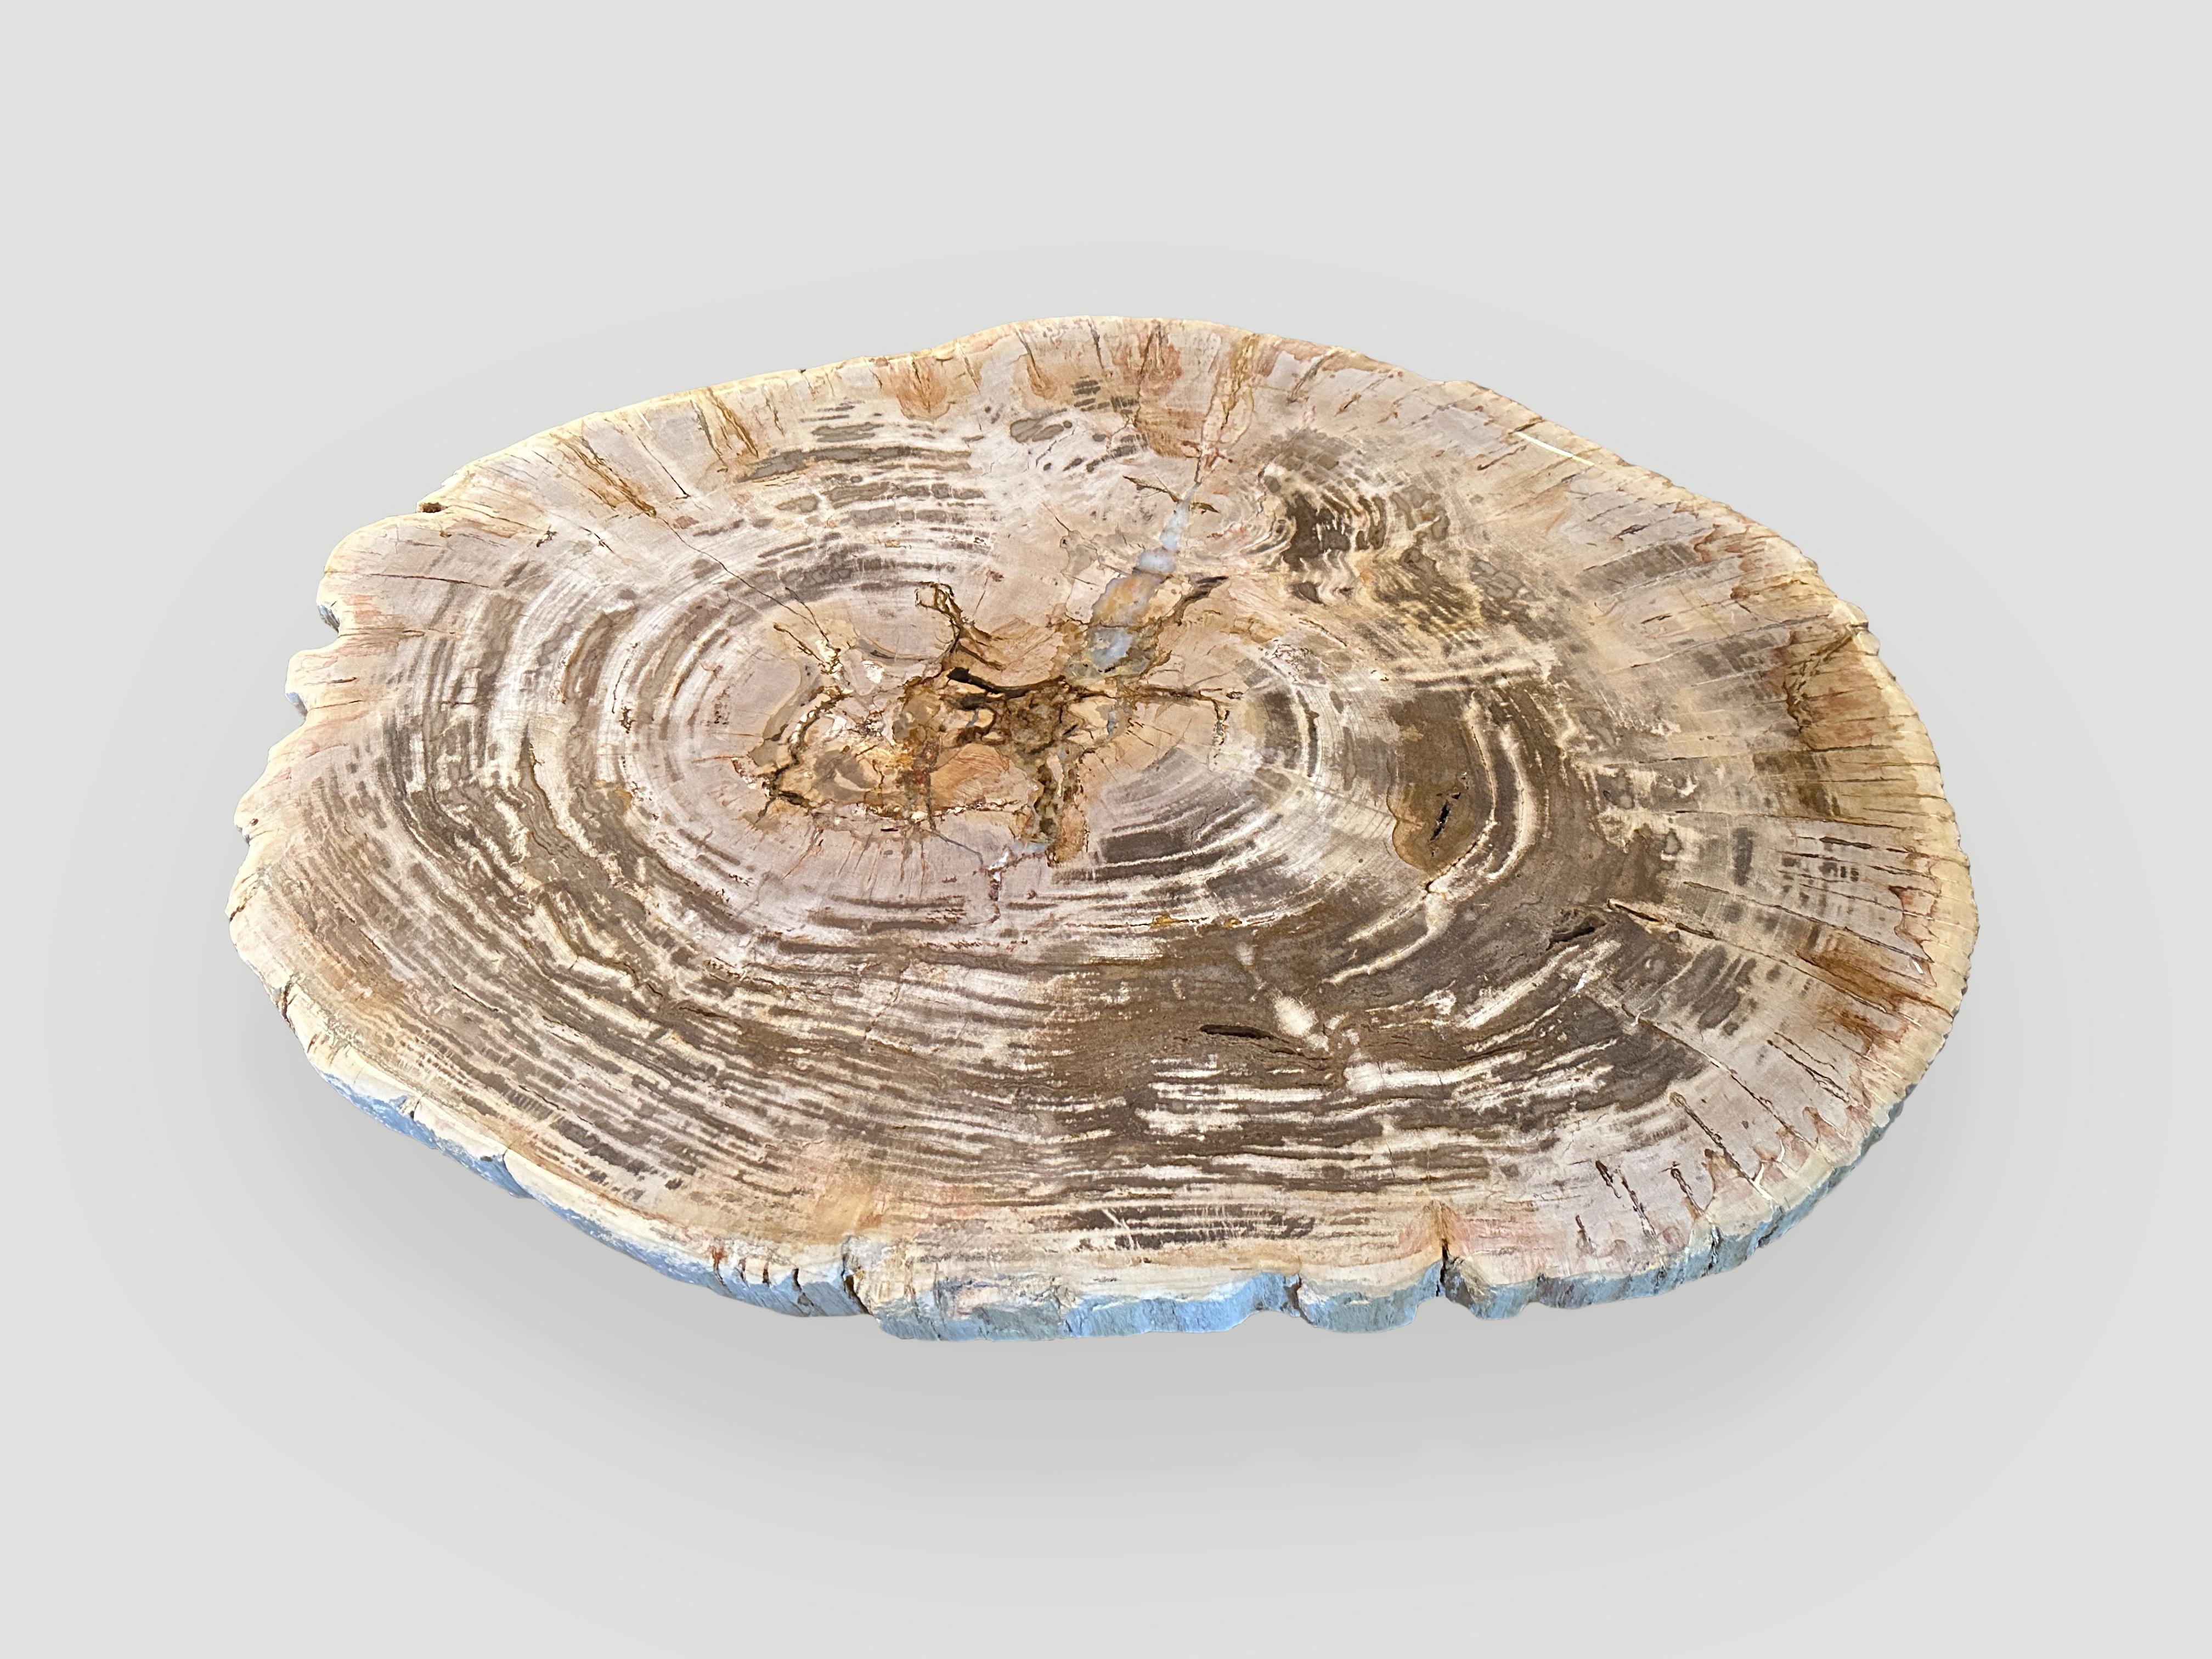 Impressive two inch thick, high quality petrified wood slab coffee table, resting on an organic white washed base. It’s fascinating how Mother Nature produces these stunning 40 million year old petrified teak logs with such contrasting colors and